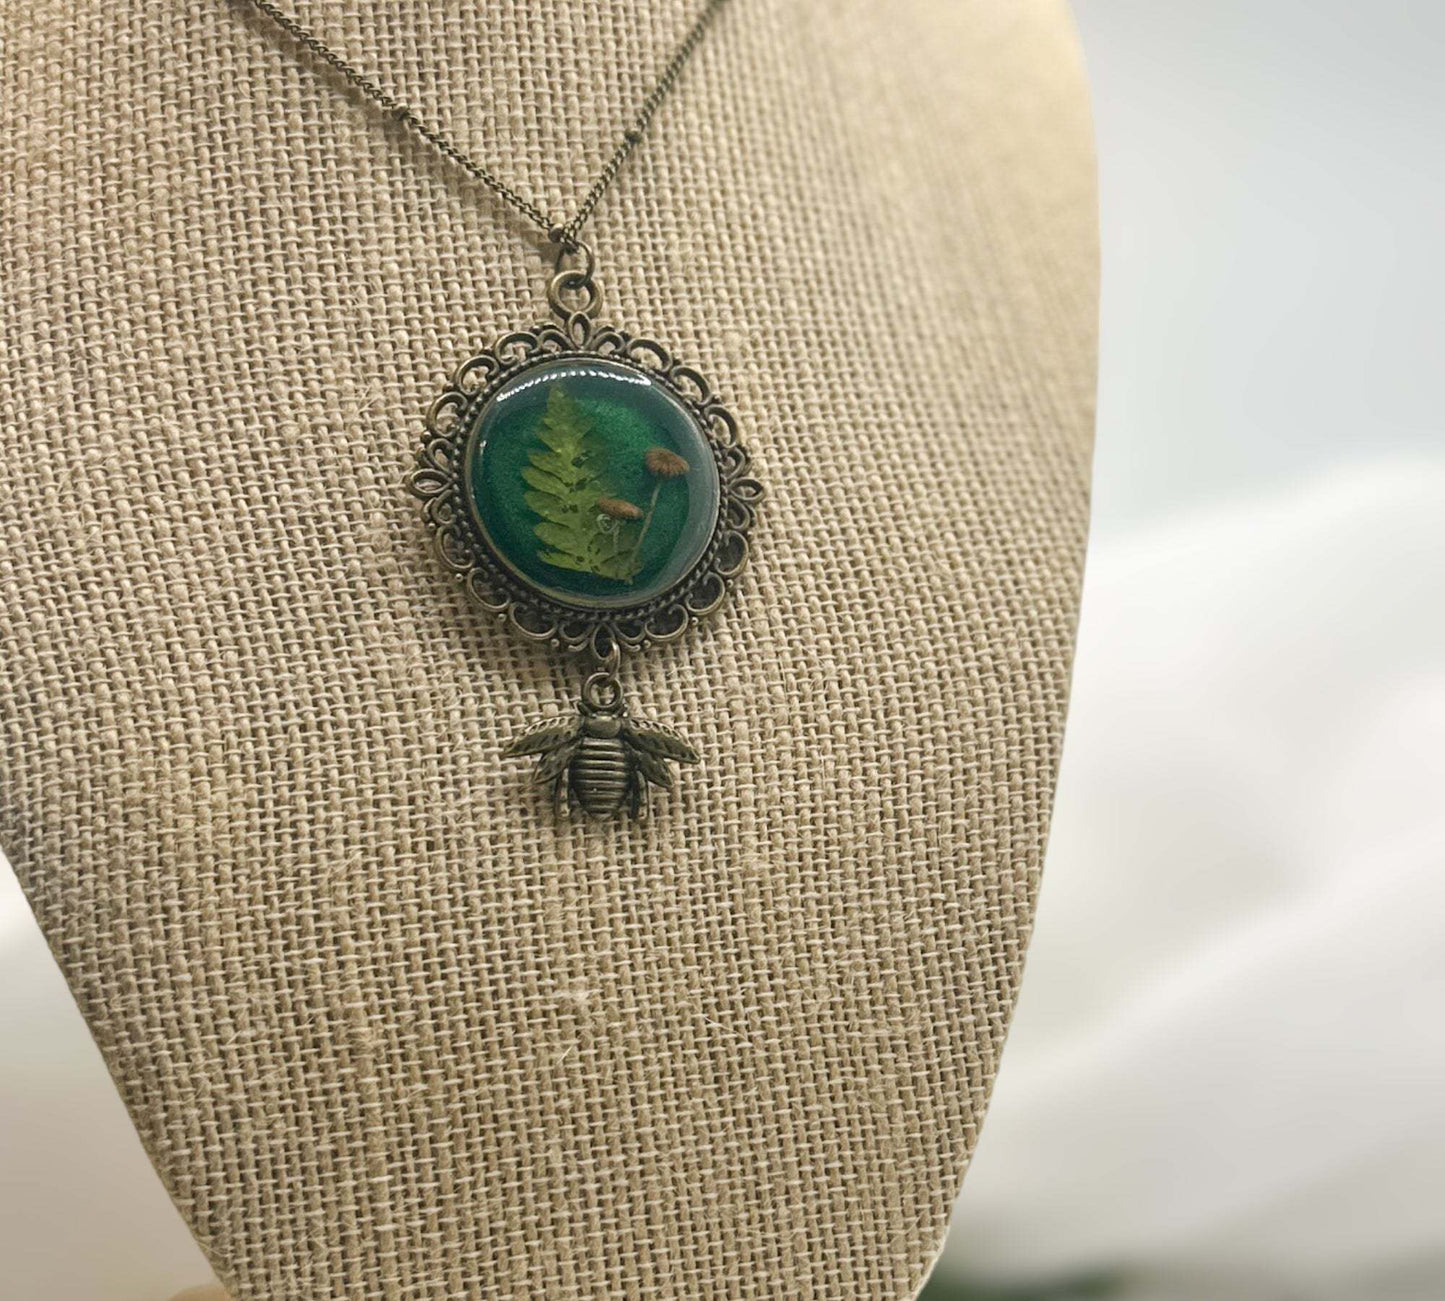 Mushroom Pendant - Magical Green Forest with Copper Bee